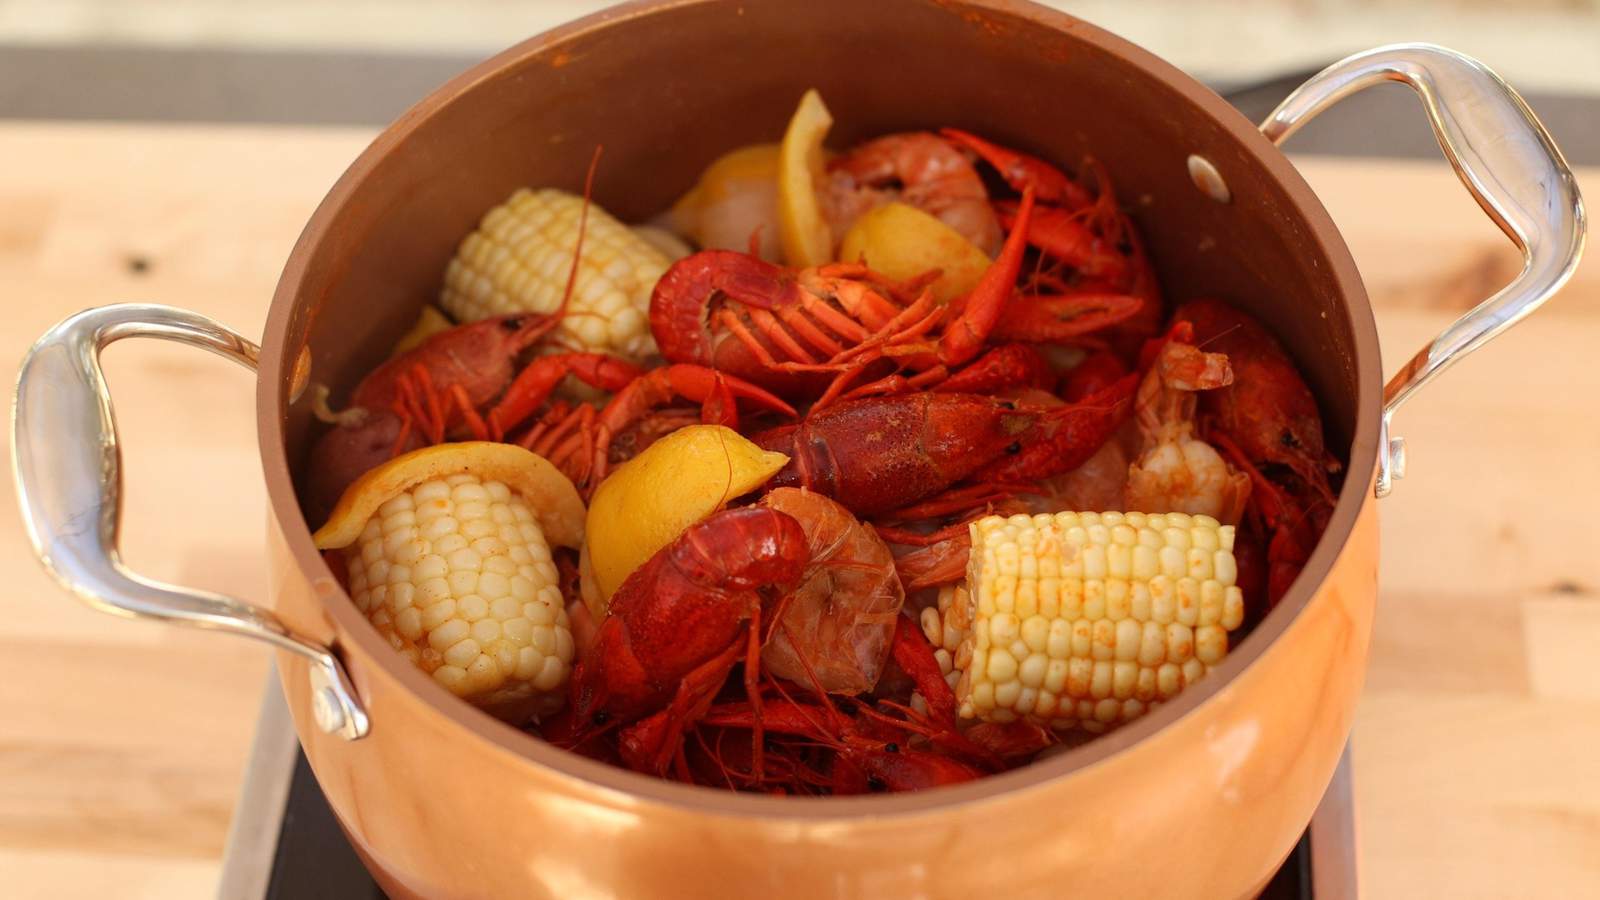 Recipe: Try this delicious crawfish boil